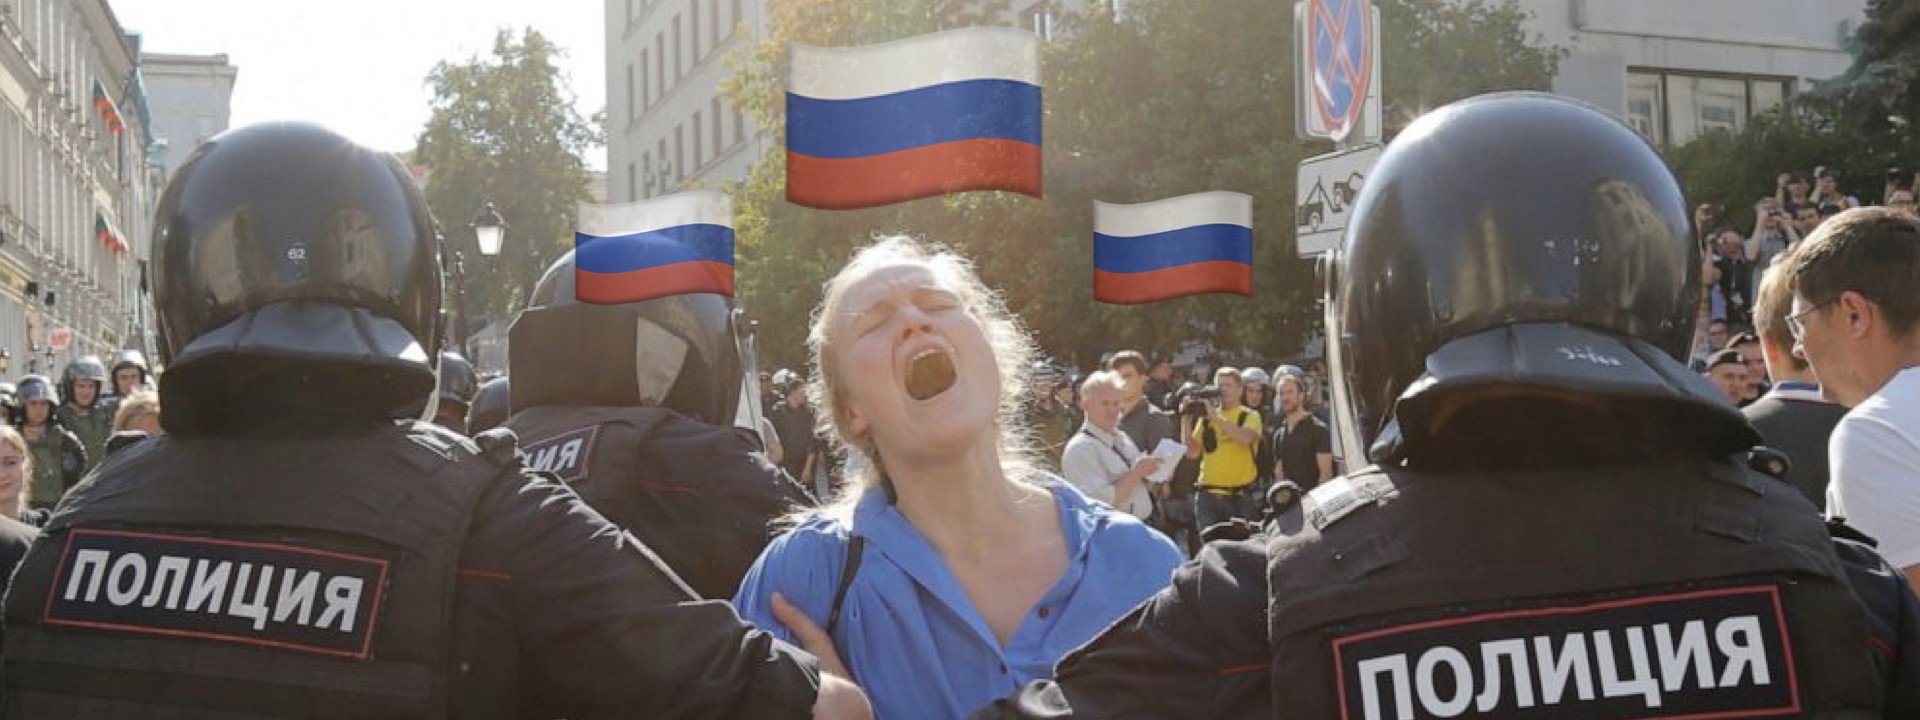 July Protests in Moscow: the Kremlin Loses Patience